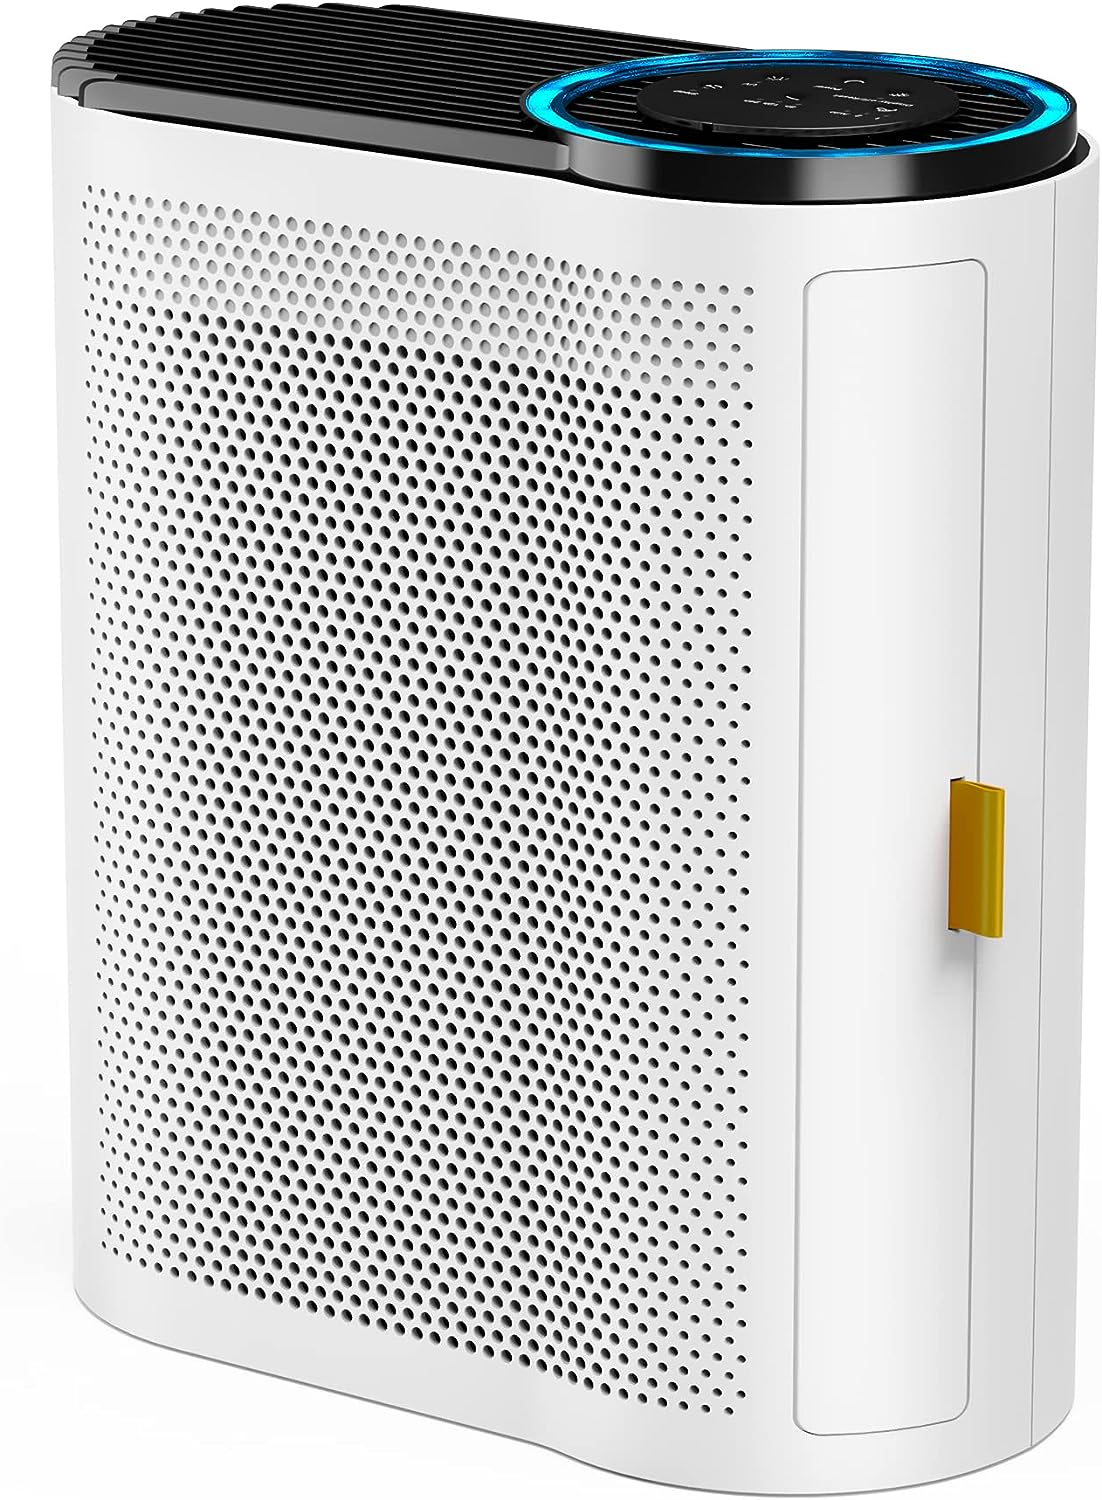 AROEVE Air Purifiers for Large Room Up to 1095 Sq Ft with H13 True HEPA Filter